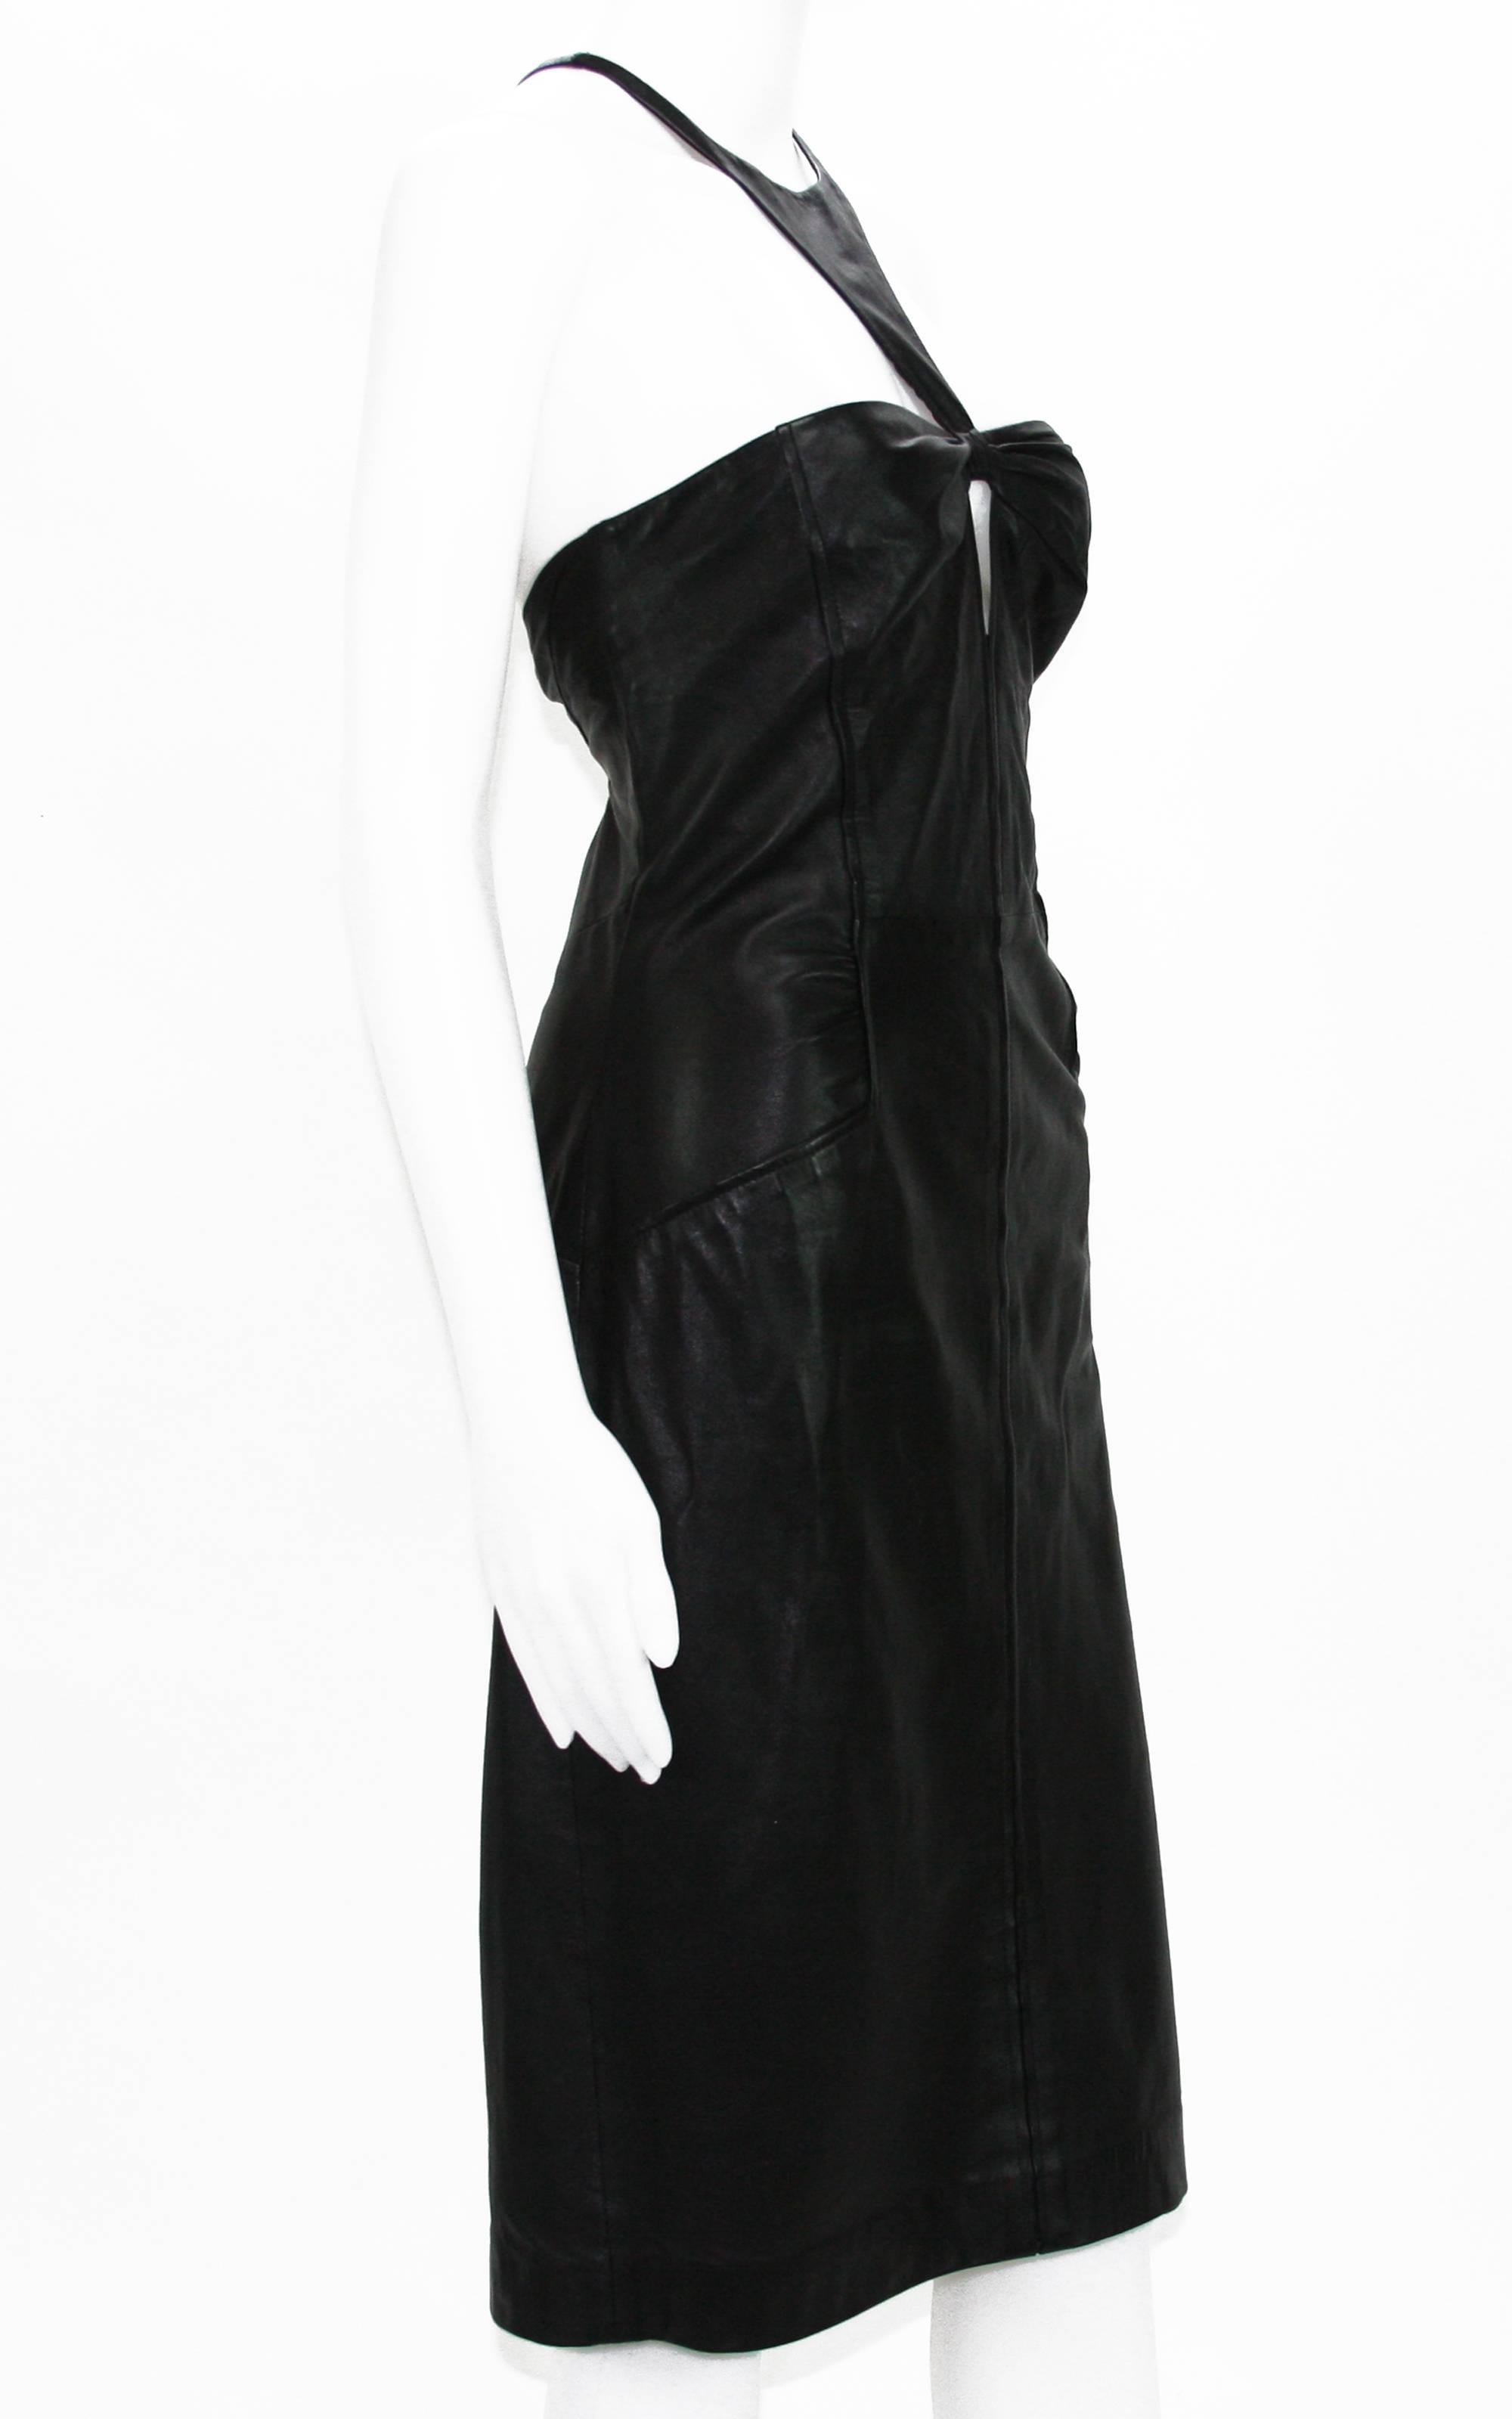 Tom Ford for Gucci Black Leather Cocktail Dress
2004 Collection
Italian size 44 
Color - Black. 100% Super Soft Leather, Fully Lined, Side Zip Closure.
Measurements: Length - 40 inches, Waist - 30